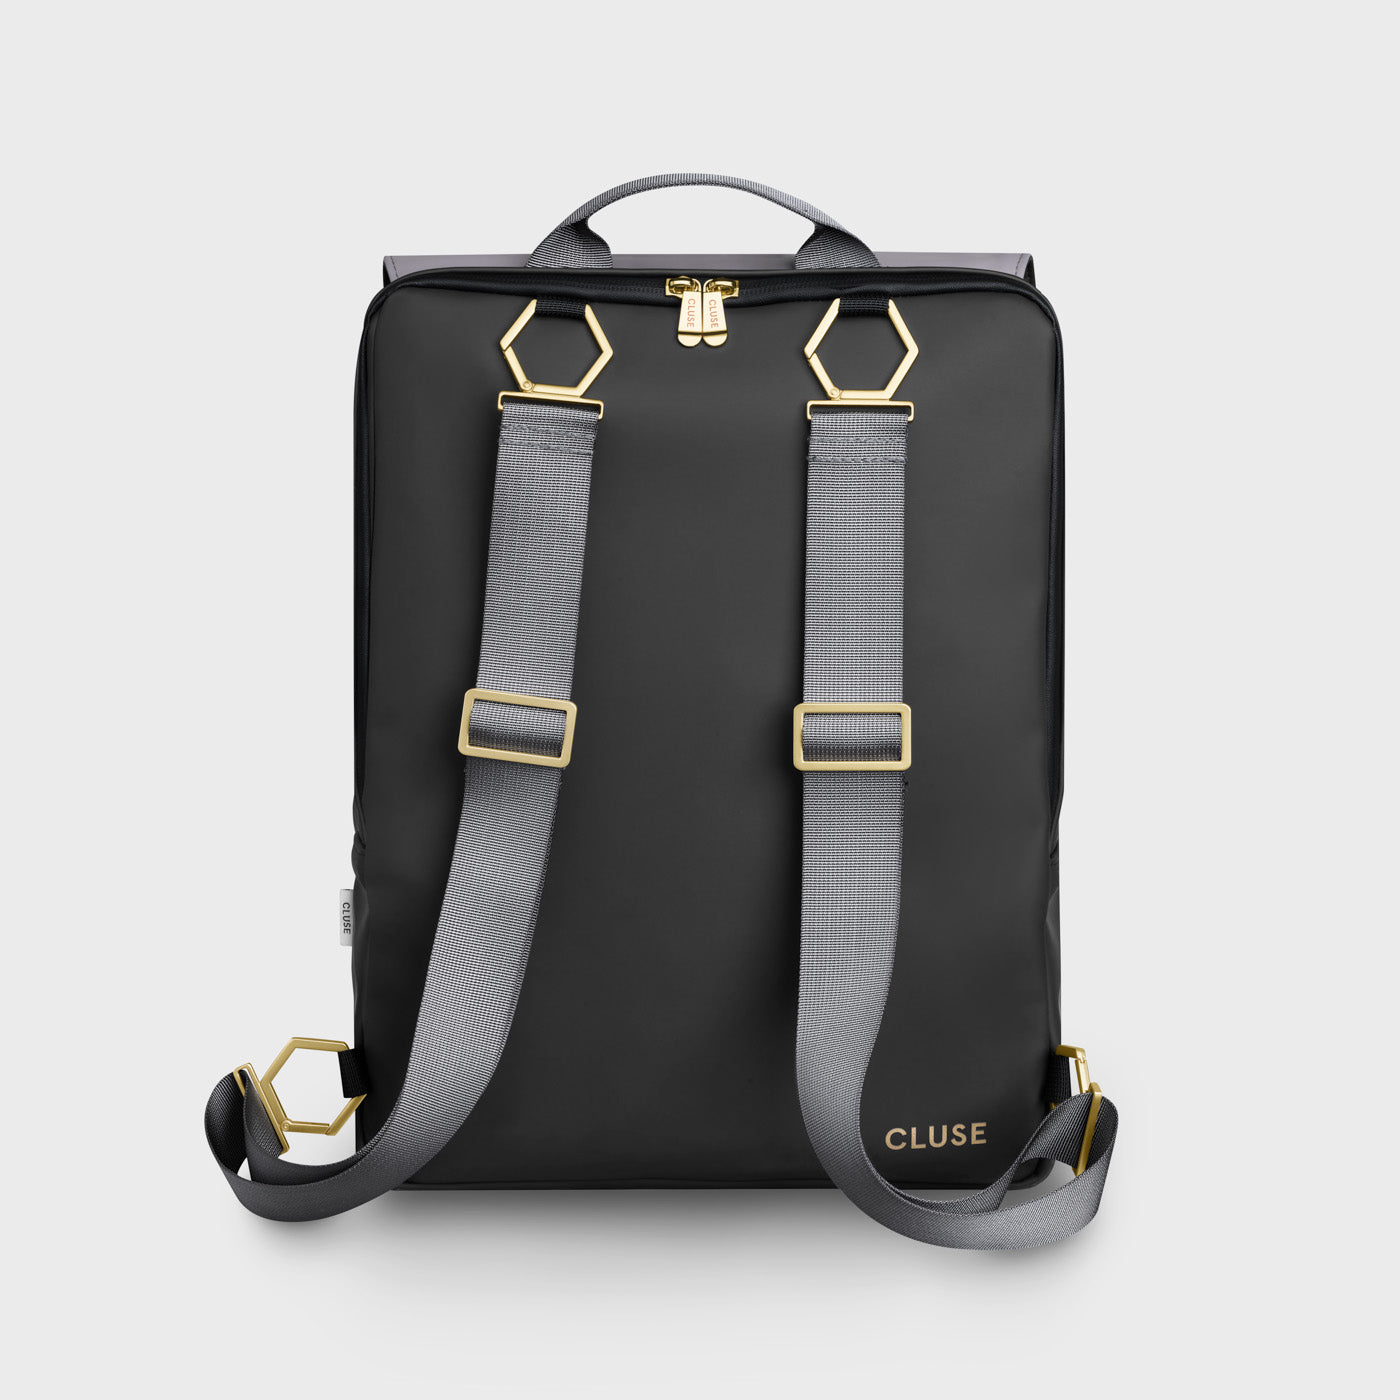 CLUSE watches, jewellery​, backpacks • Official Store